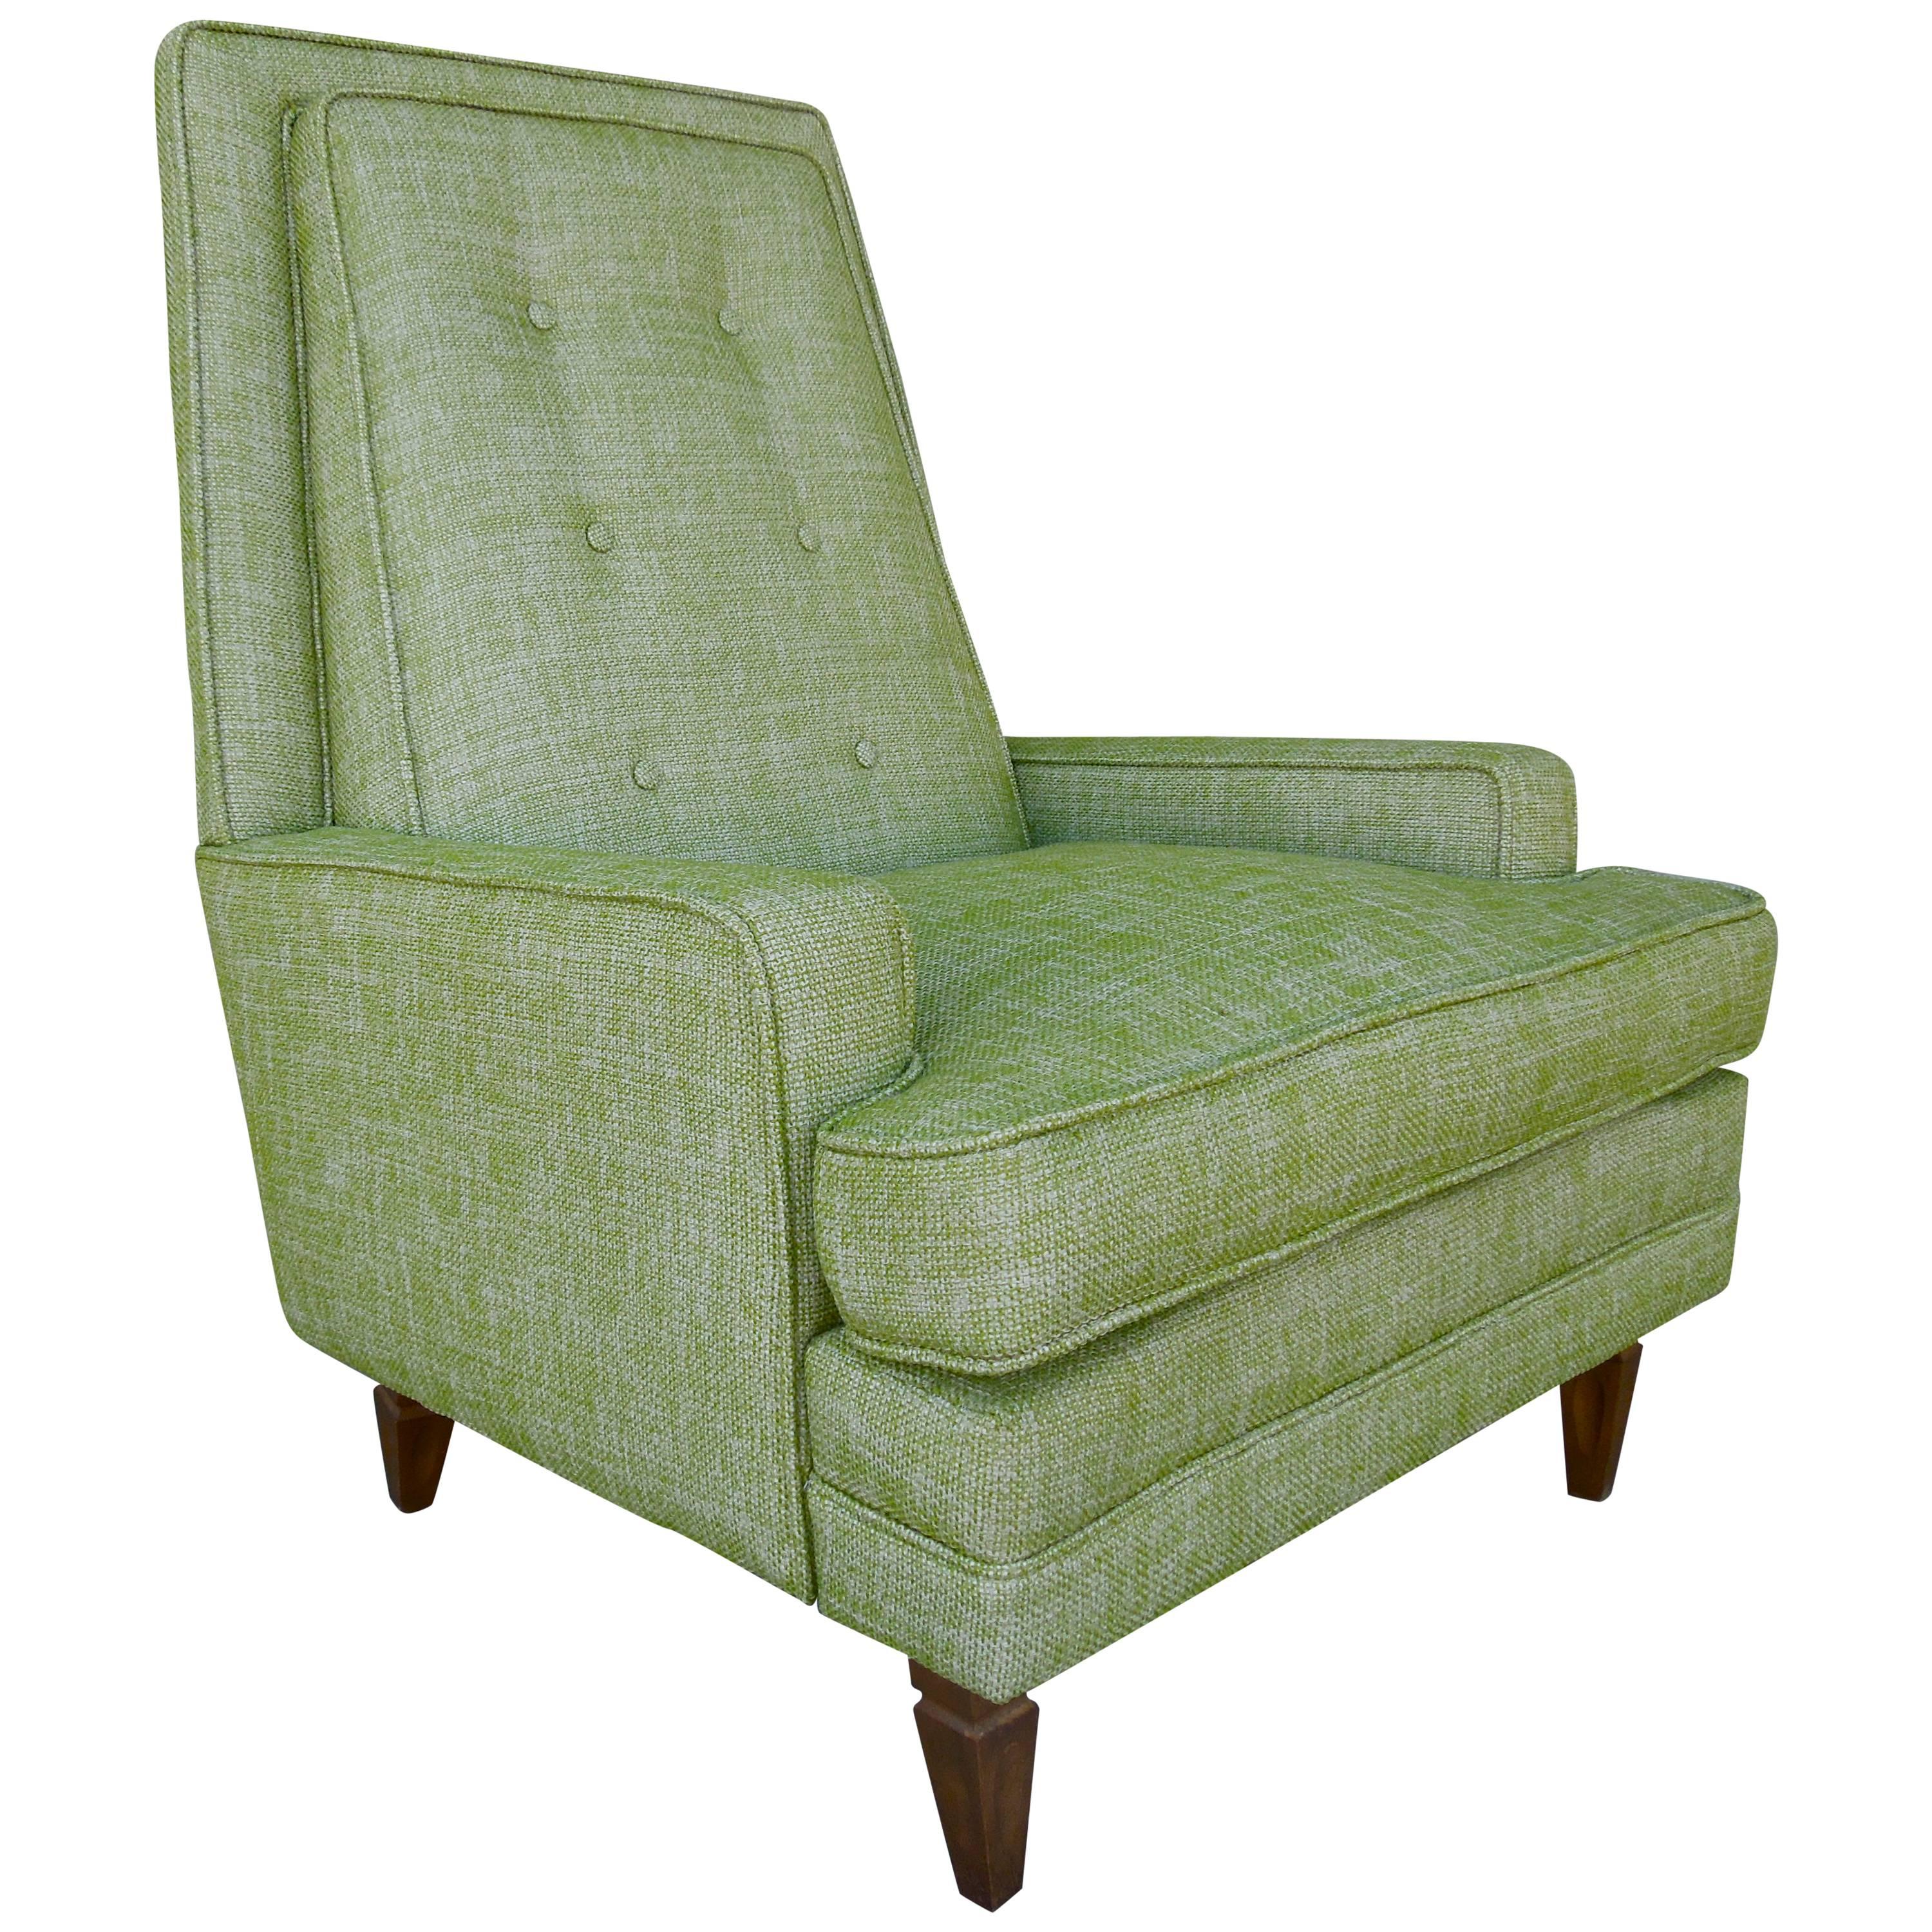 1960s Modern Tailored Armchair in New High End Lime Linen Tweed Fabric